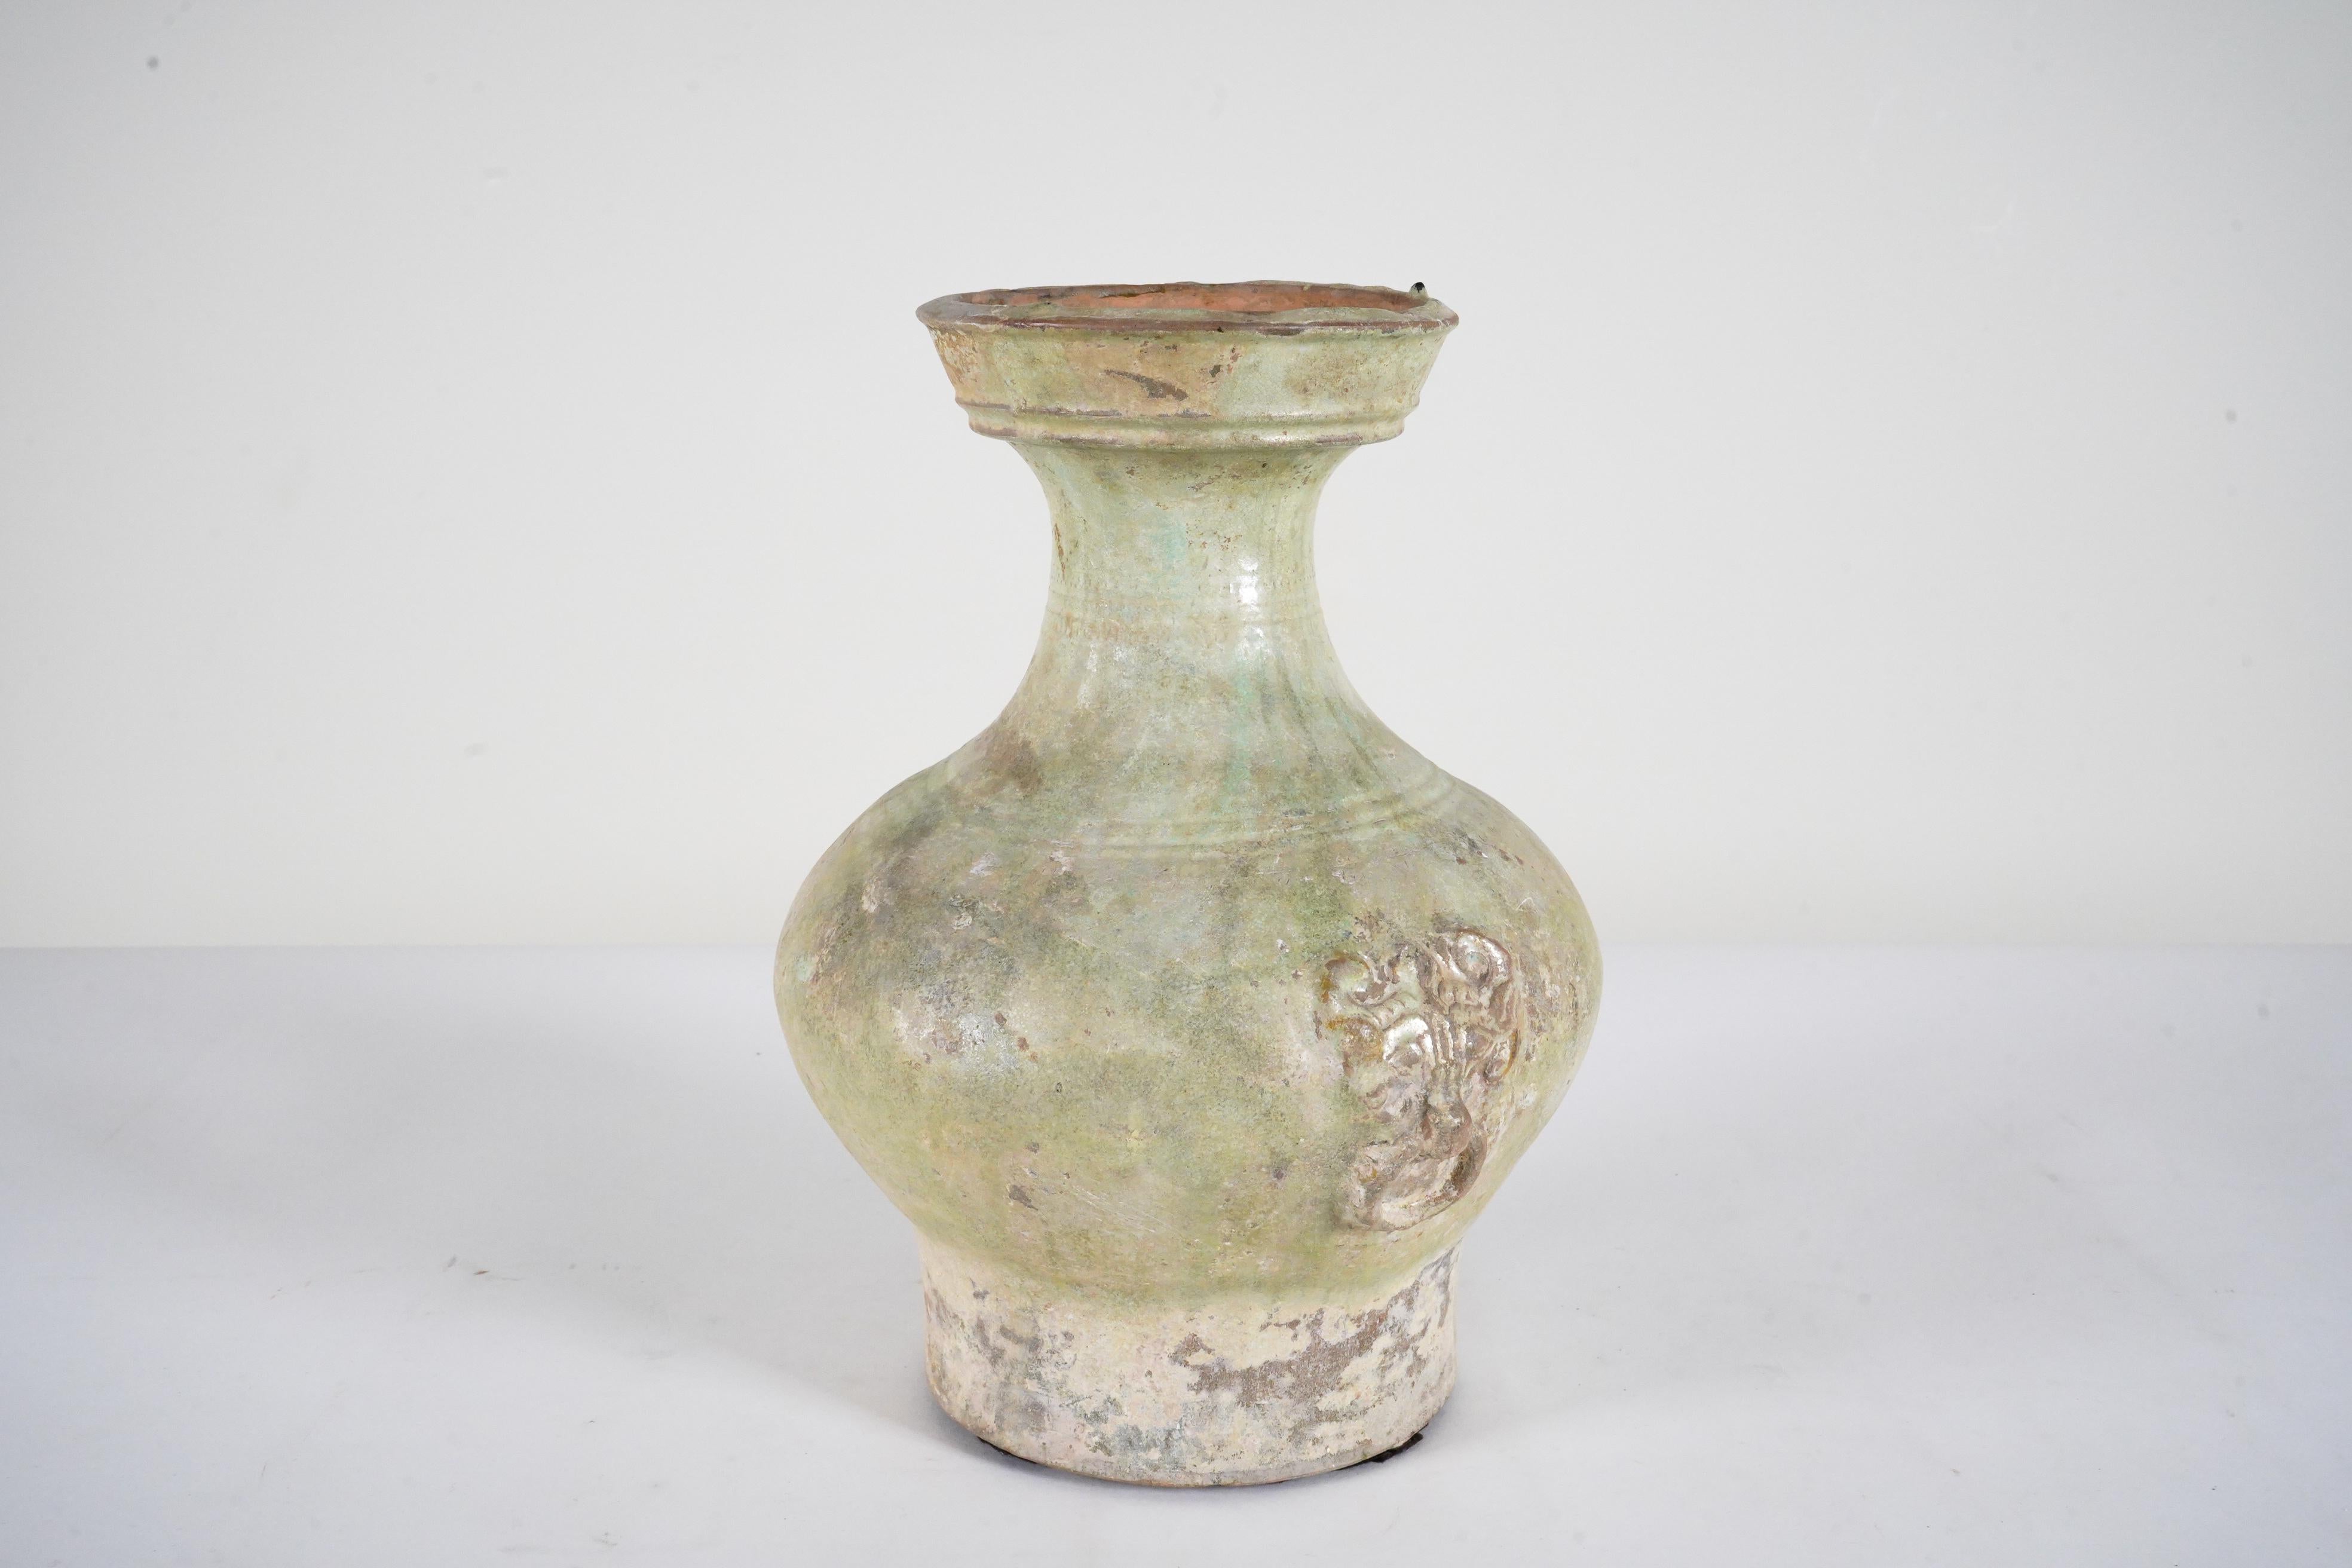 This is a fine, heavily patinated example of a Han hu wine storage vessel, buried for the afterlife. The compressed globular body narrows to a slender waisted neck, covered with a dark green lead glaze that has developed a silvery patina due to